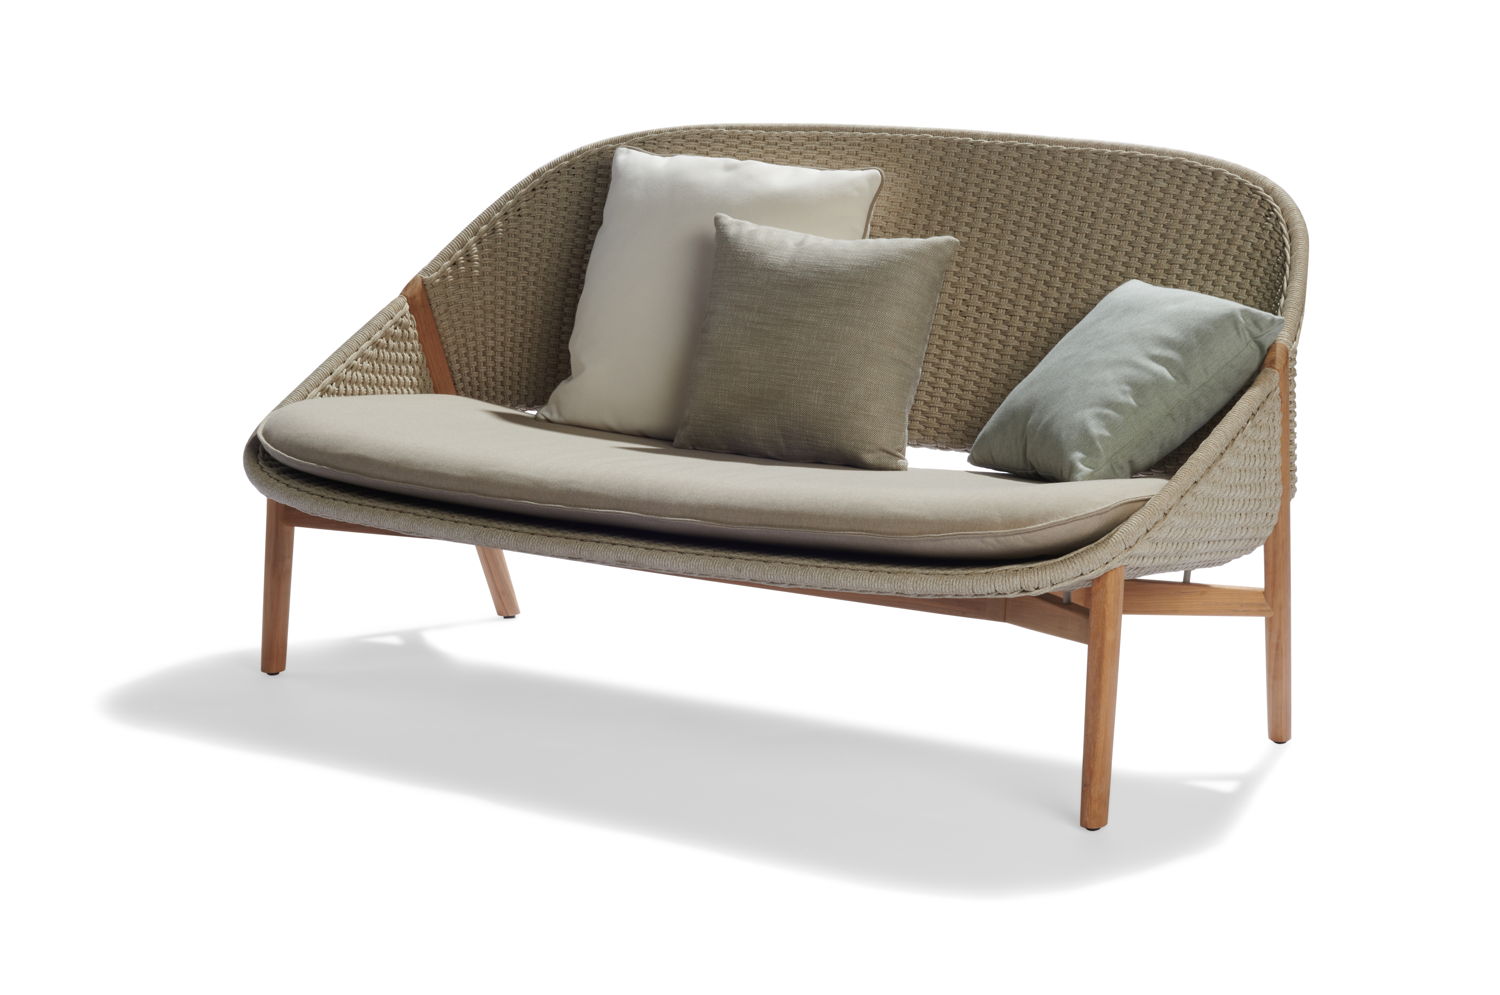 Tribù_Elio 2-seat linen cushion_from €2895 + cushion from €800